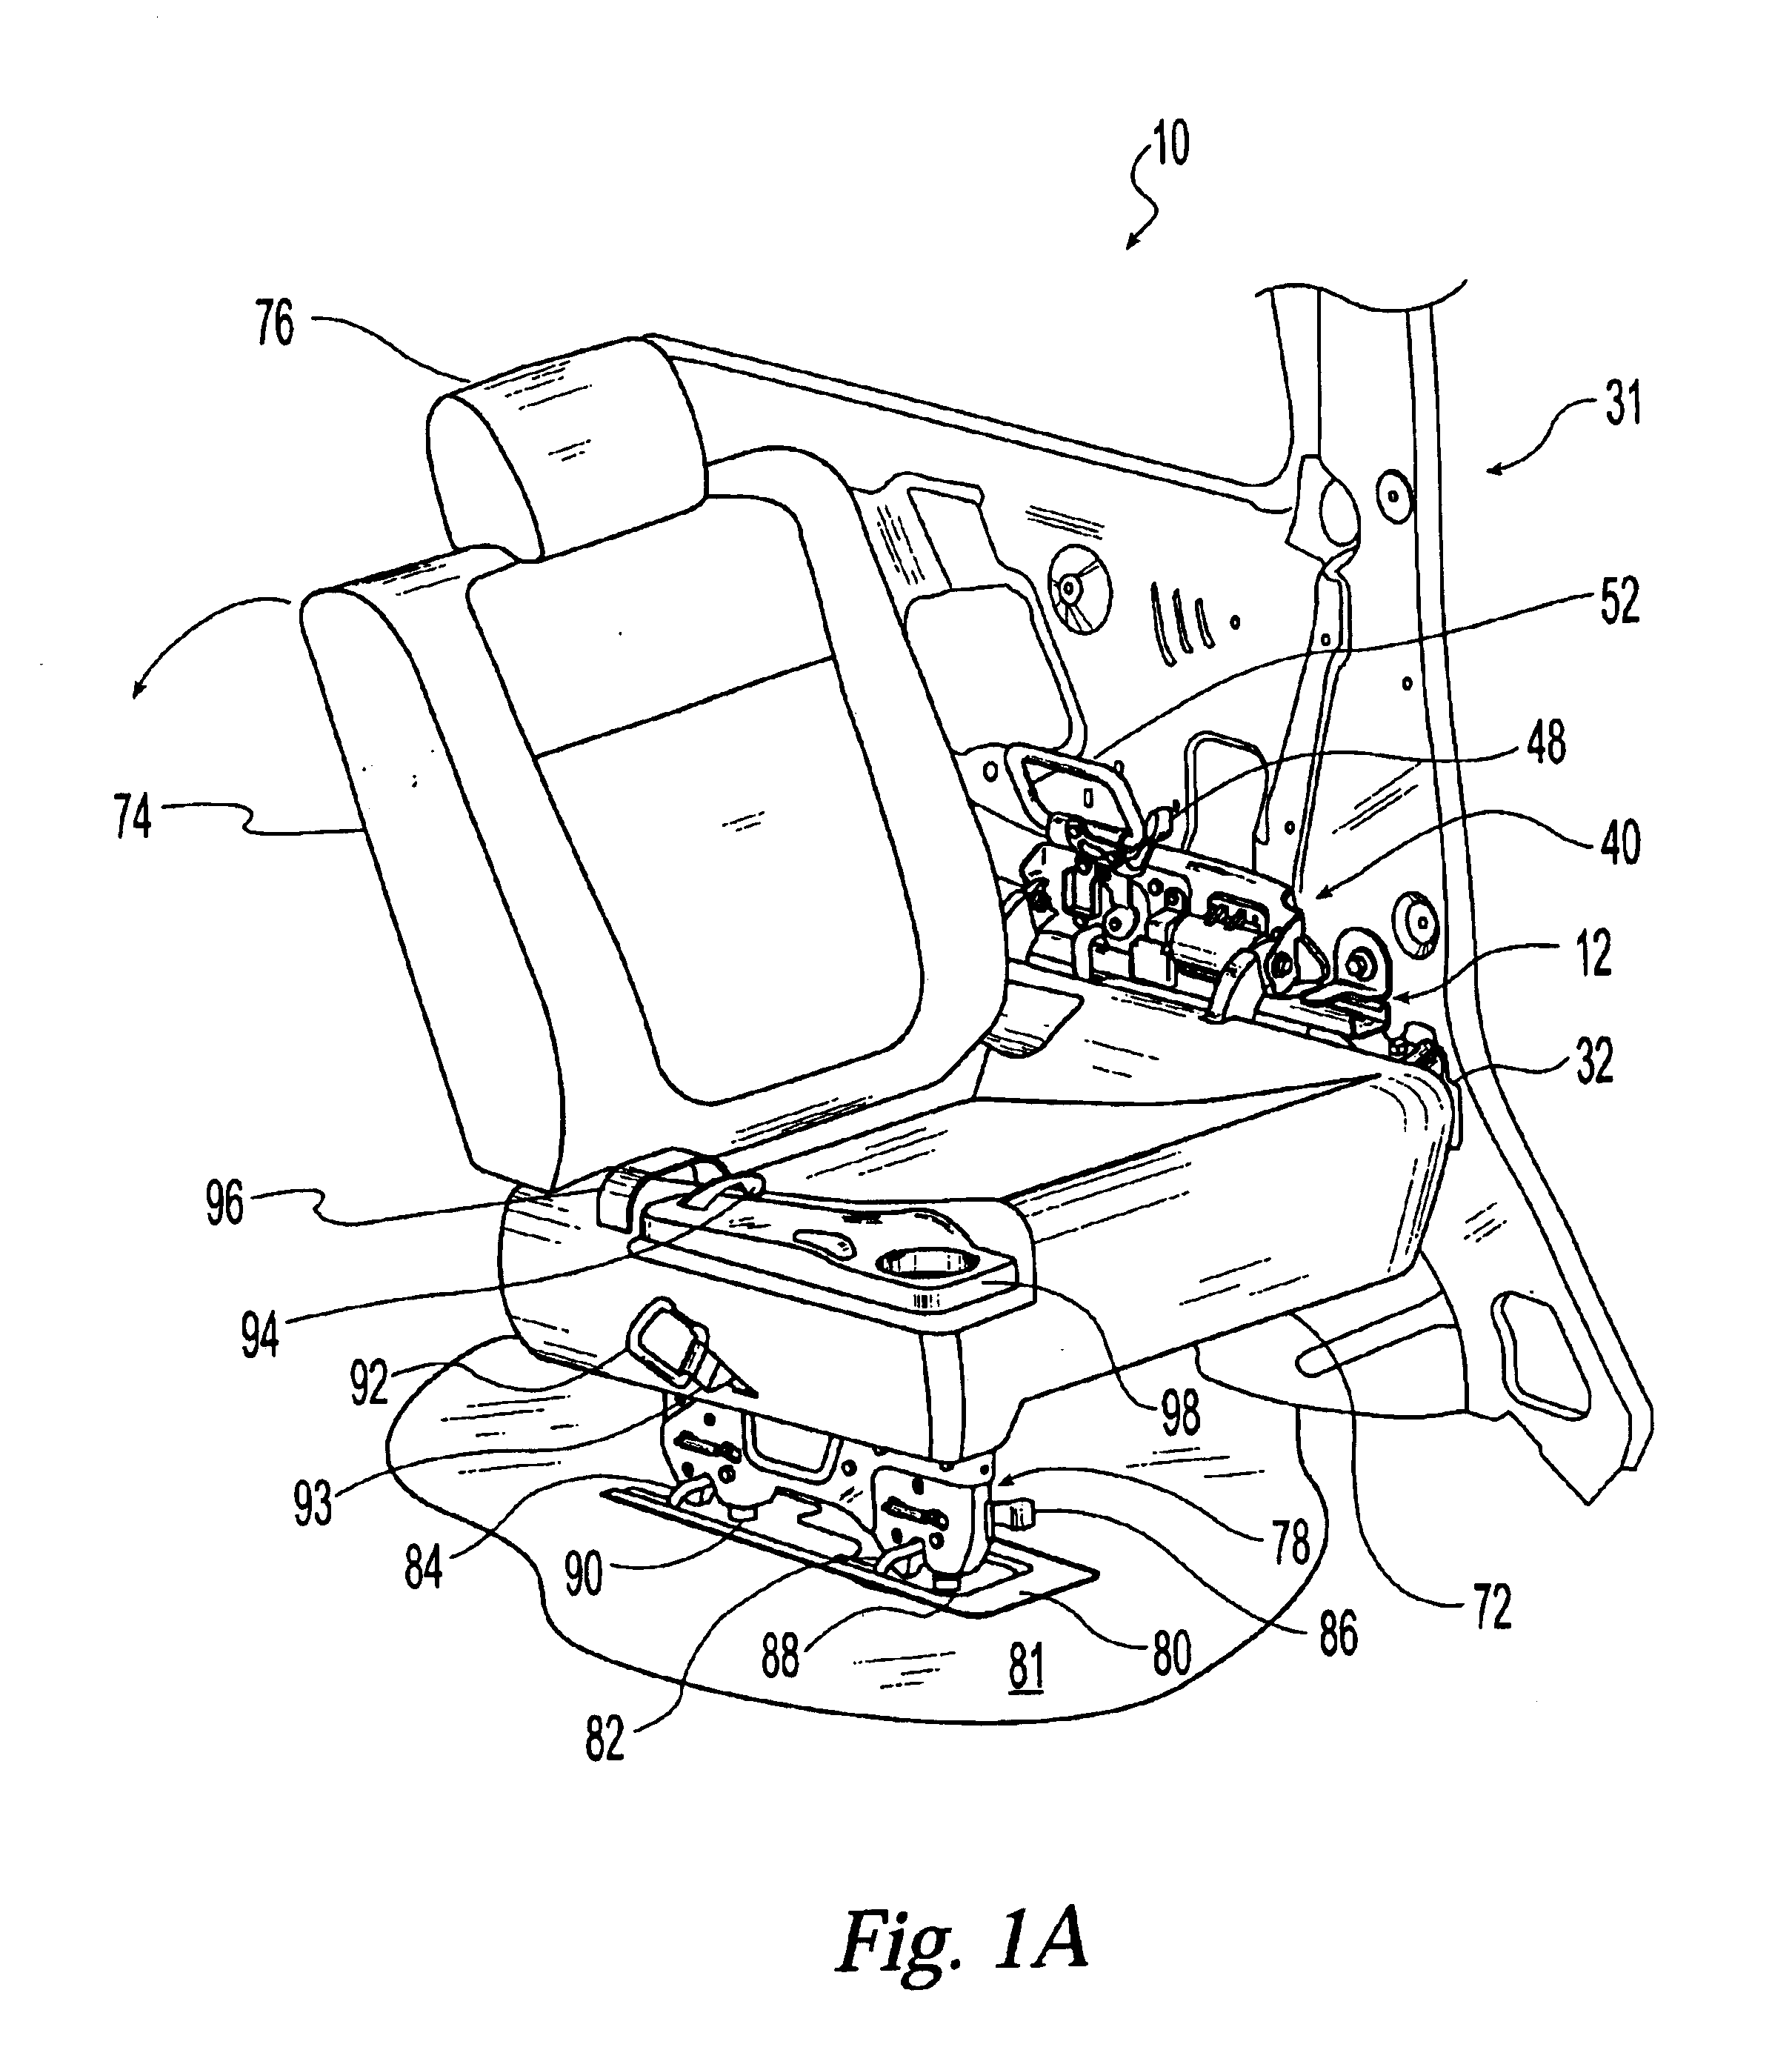 Removable jump seat for a vehicle